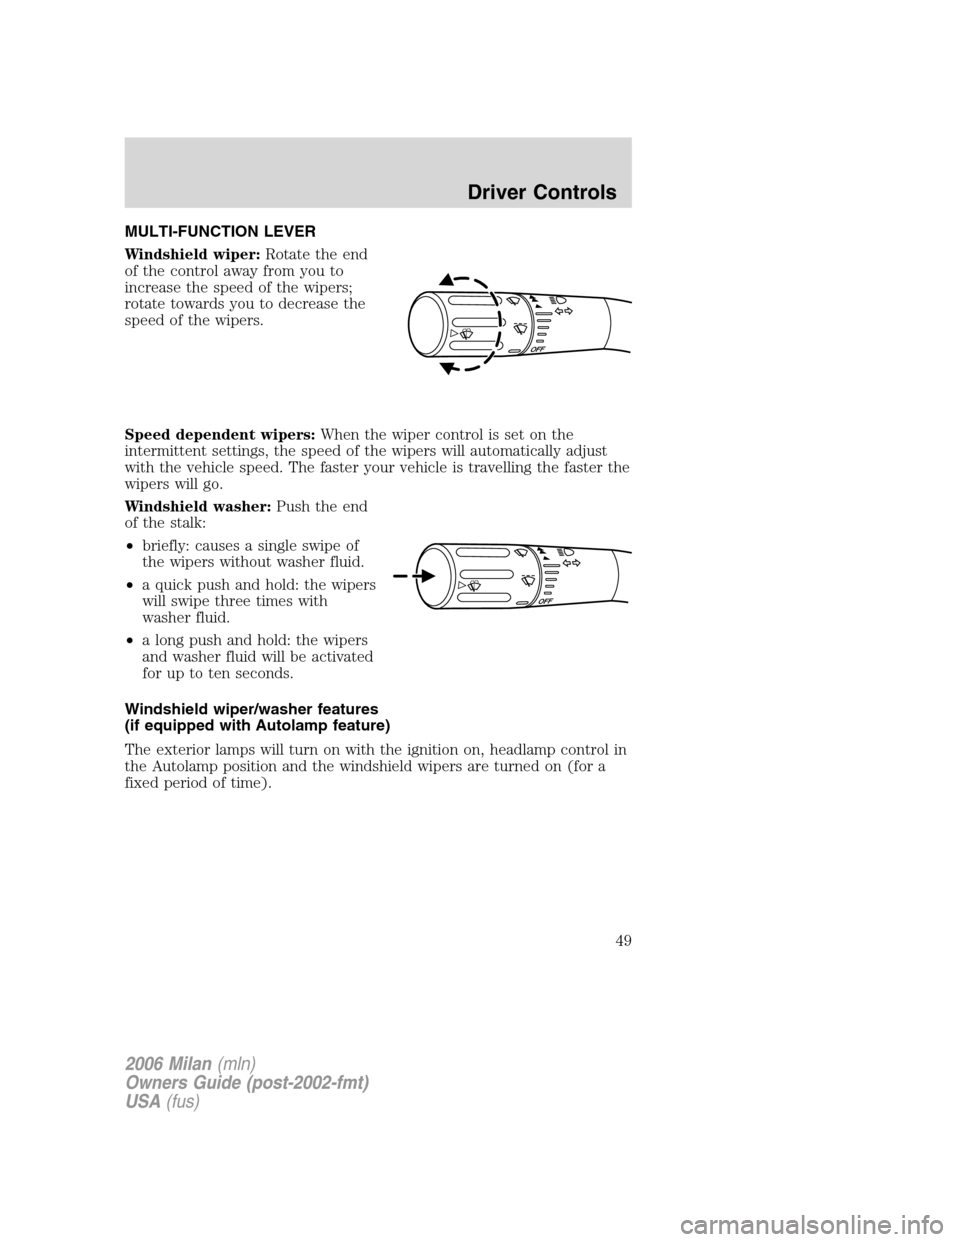 Mercury Milan 2006  s Service Manual MULTI-FUNCTION LEVER
Windshield wiper:Rotate the end
of the control away from you to
increase the speed of the wipers;
rotate towards you to decrease the
speed of the wipers.
Speed dependent wipers:Wh